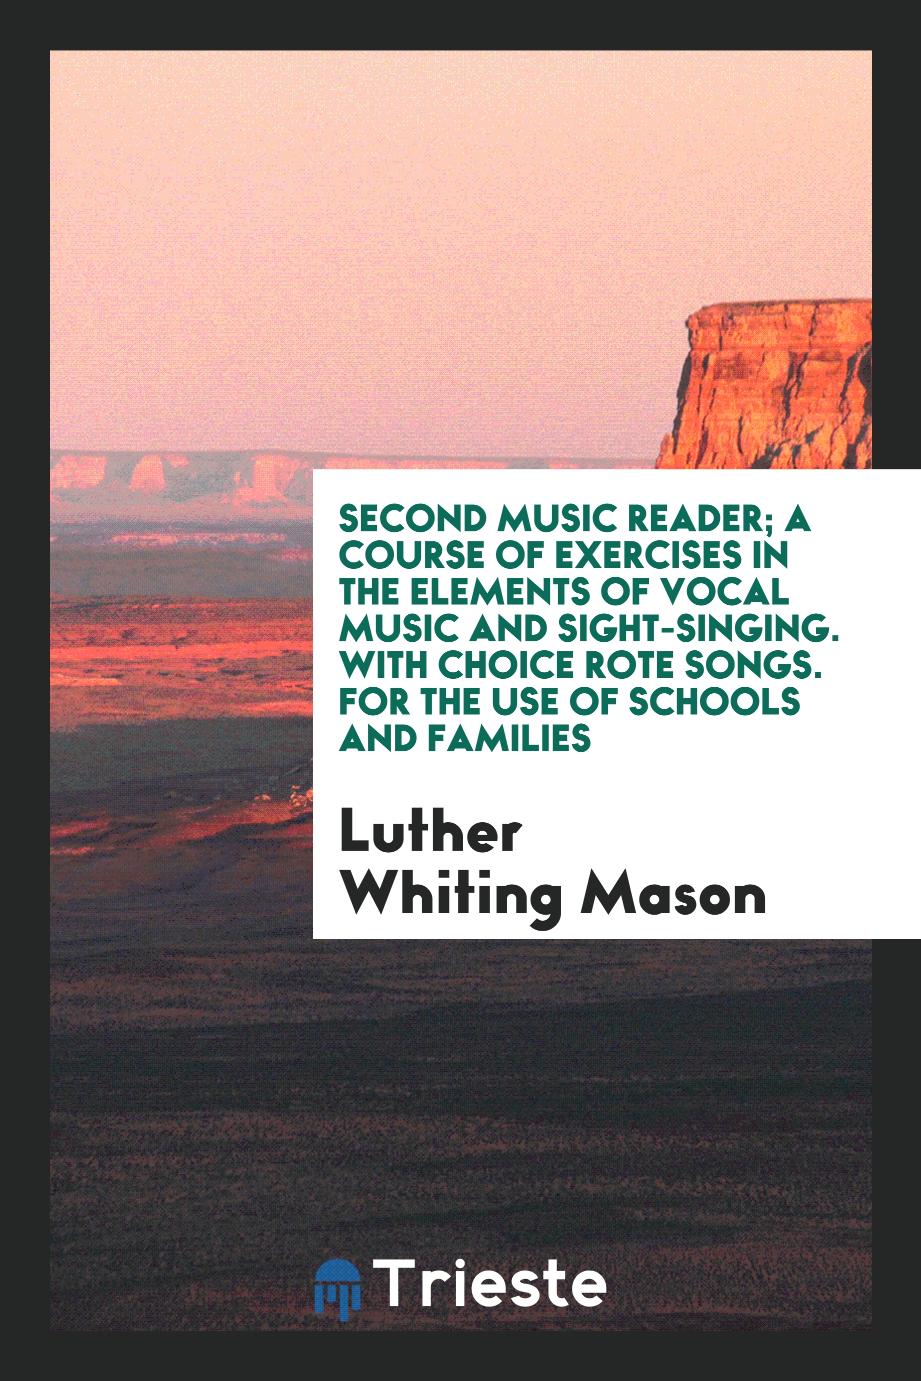 Second music reader; a course of exercises in the elements of vocal music and sight-singing. With choice rote songs. For the use of schools and families